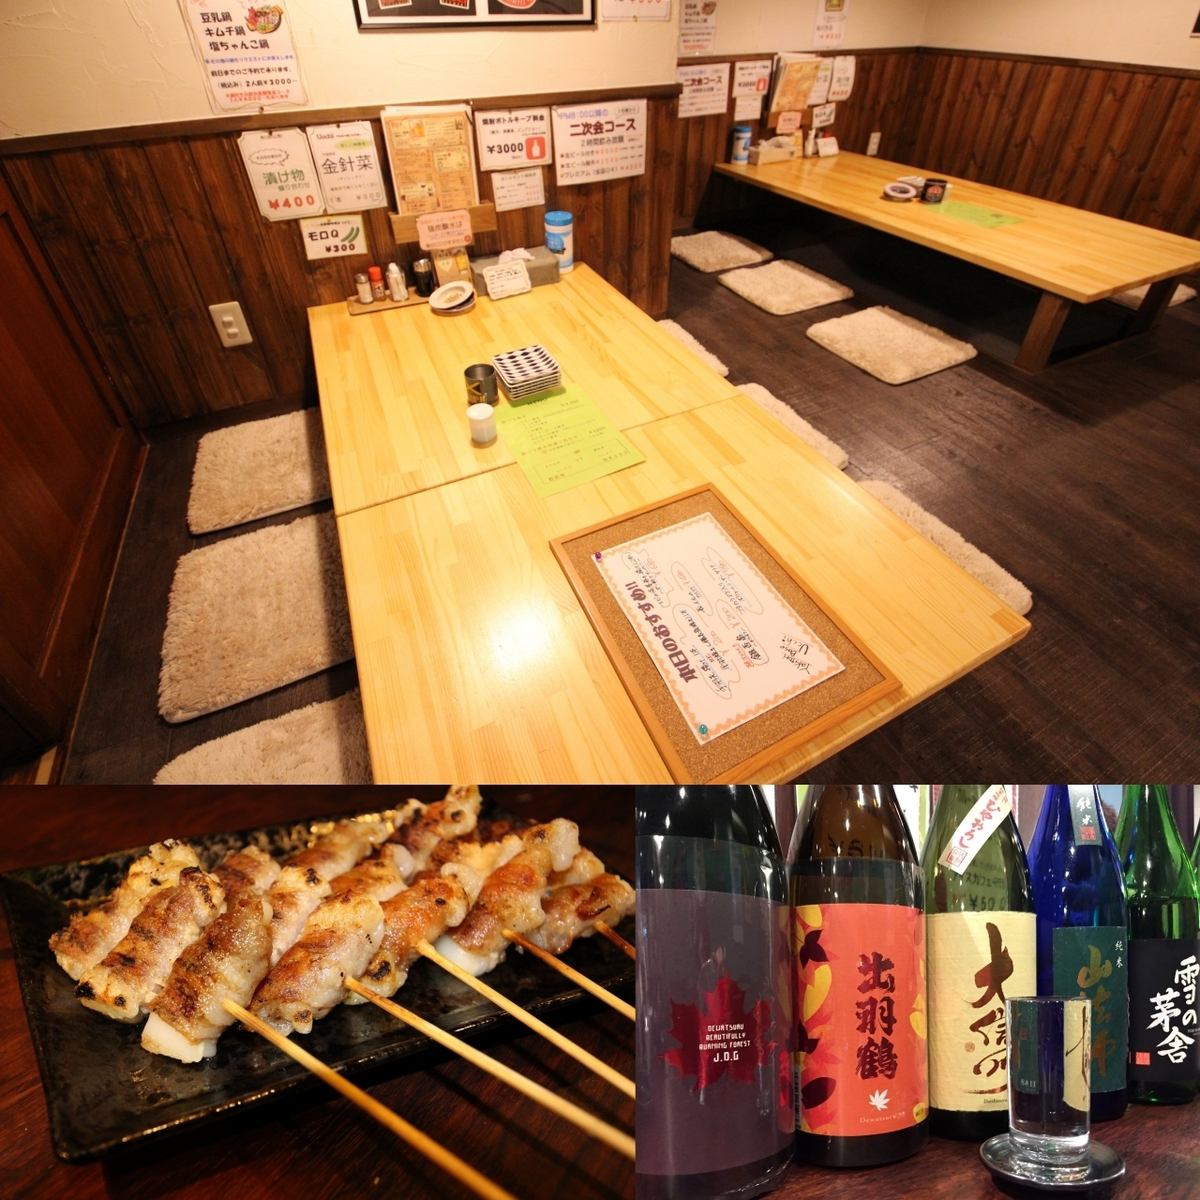 You can enjoy Hokkaido chicken, vegetables, and seasonal ingredients by charcoal grilling, and there are plenty of alcoholic beverages ♪